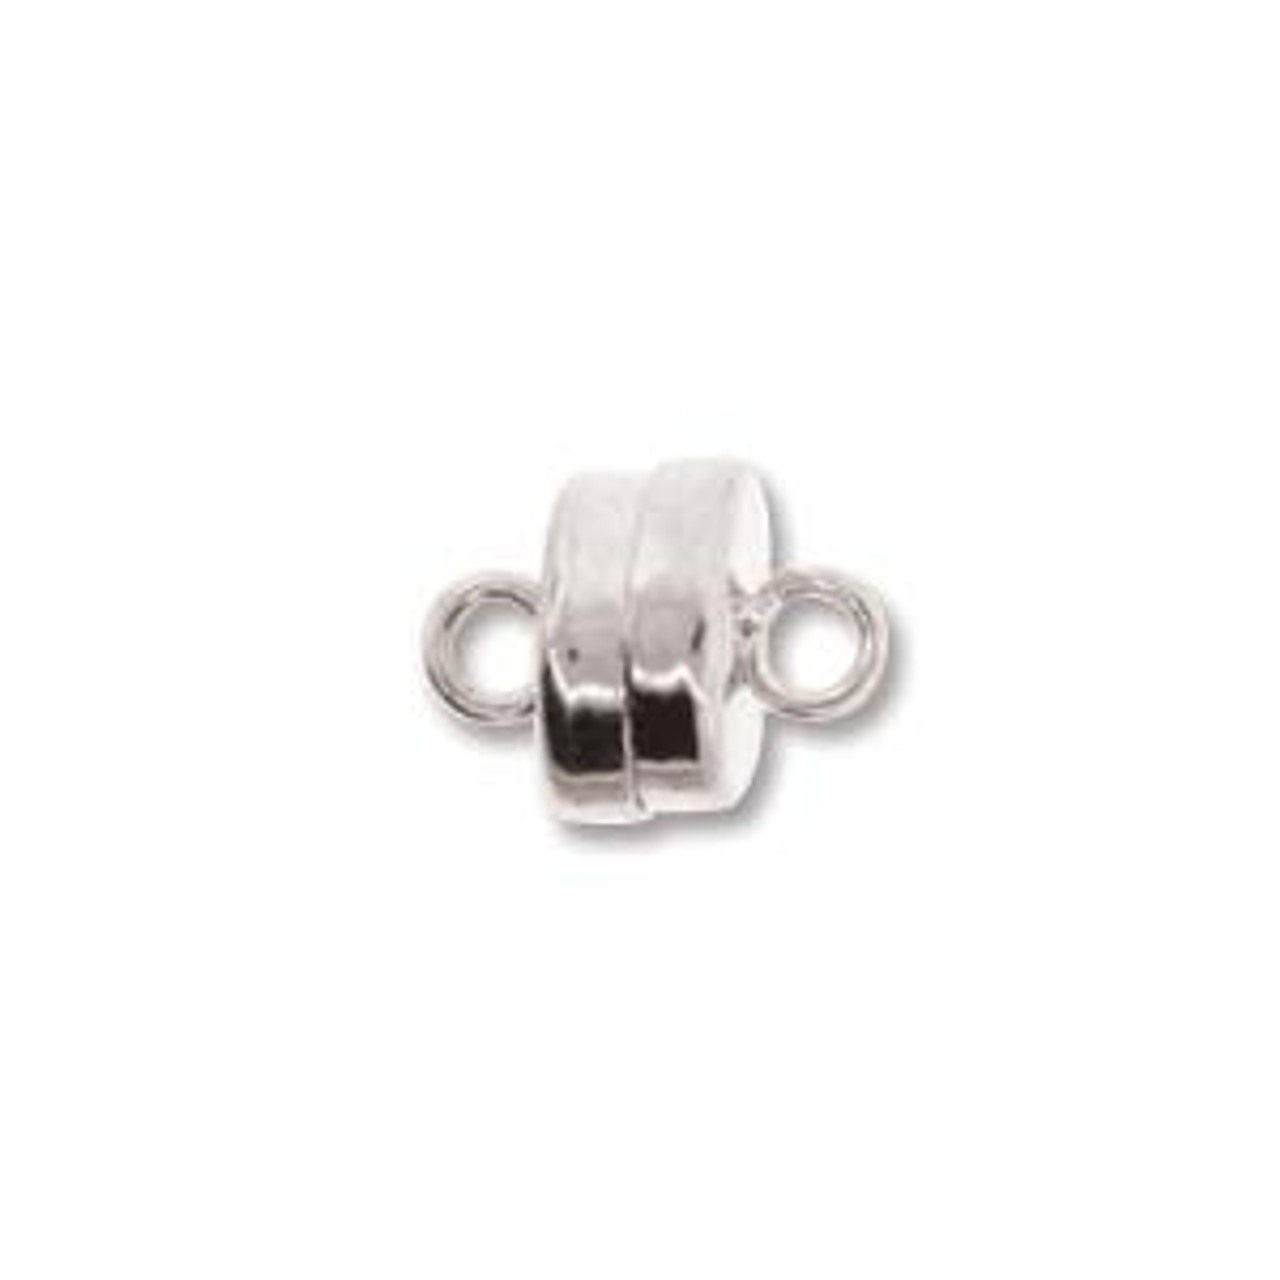 7mm MINI Magnetic Clasp Silver Plate (1 set)